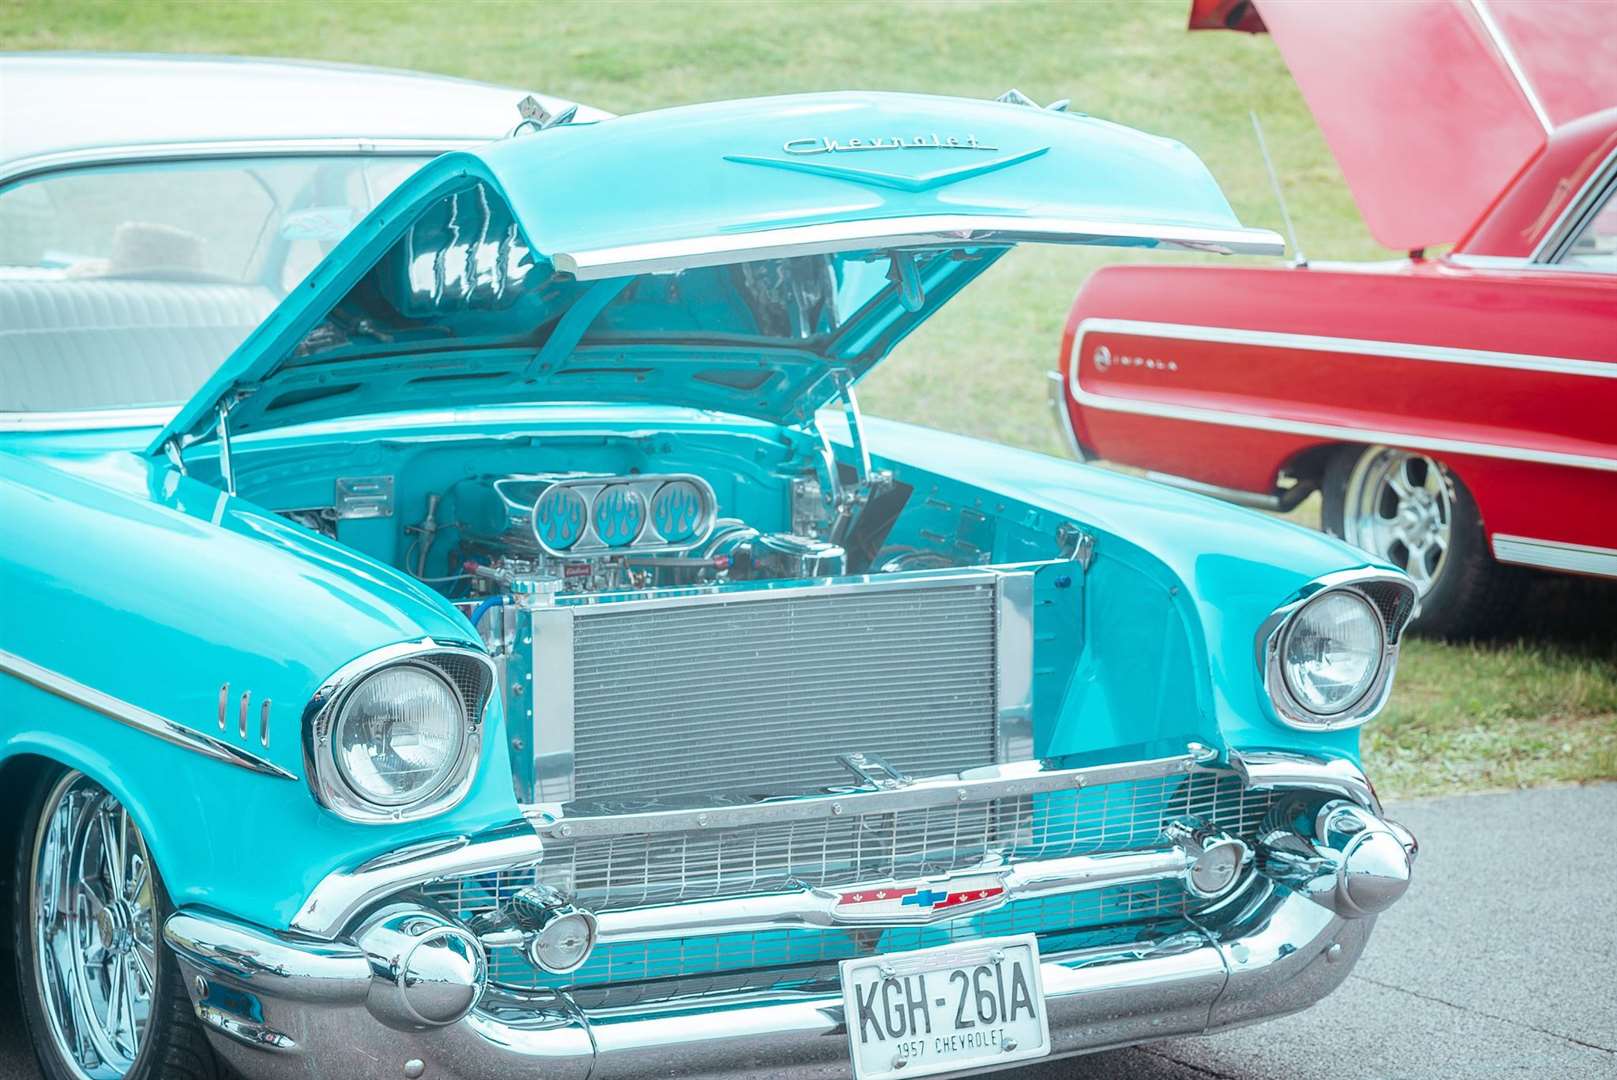 The Deal Classic Motor Show is returning for its second year at Betteshanger Park this May. Picture: Deal Classic Motor Show